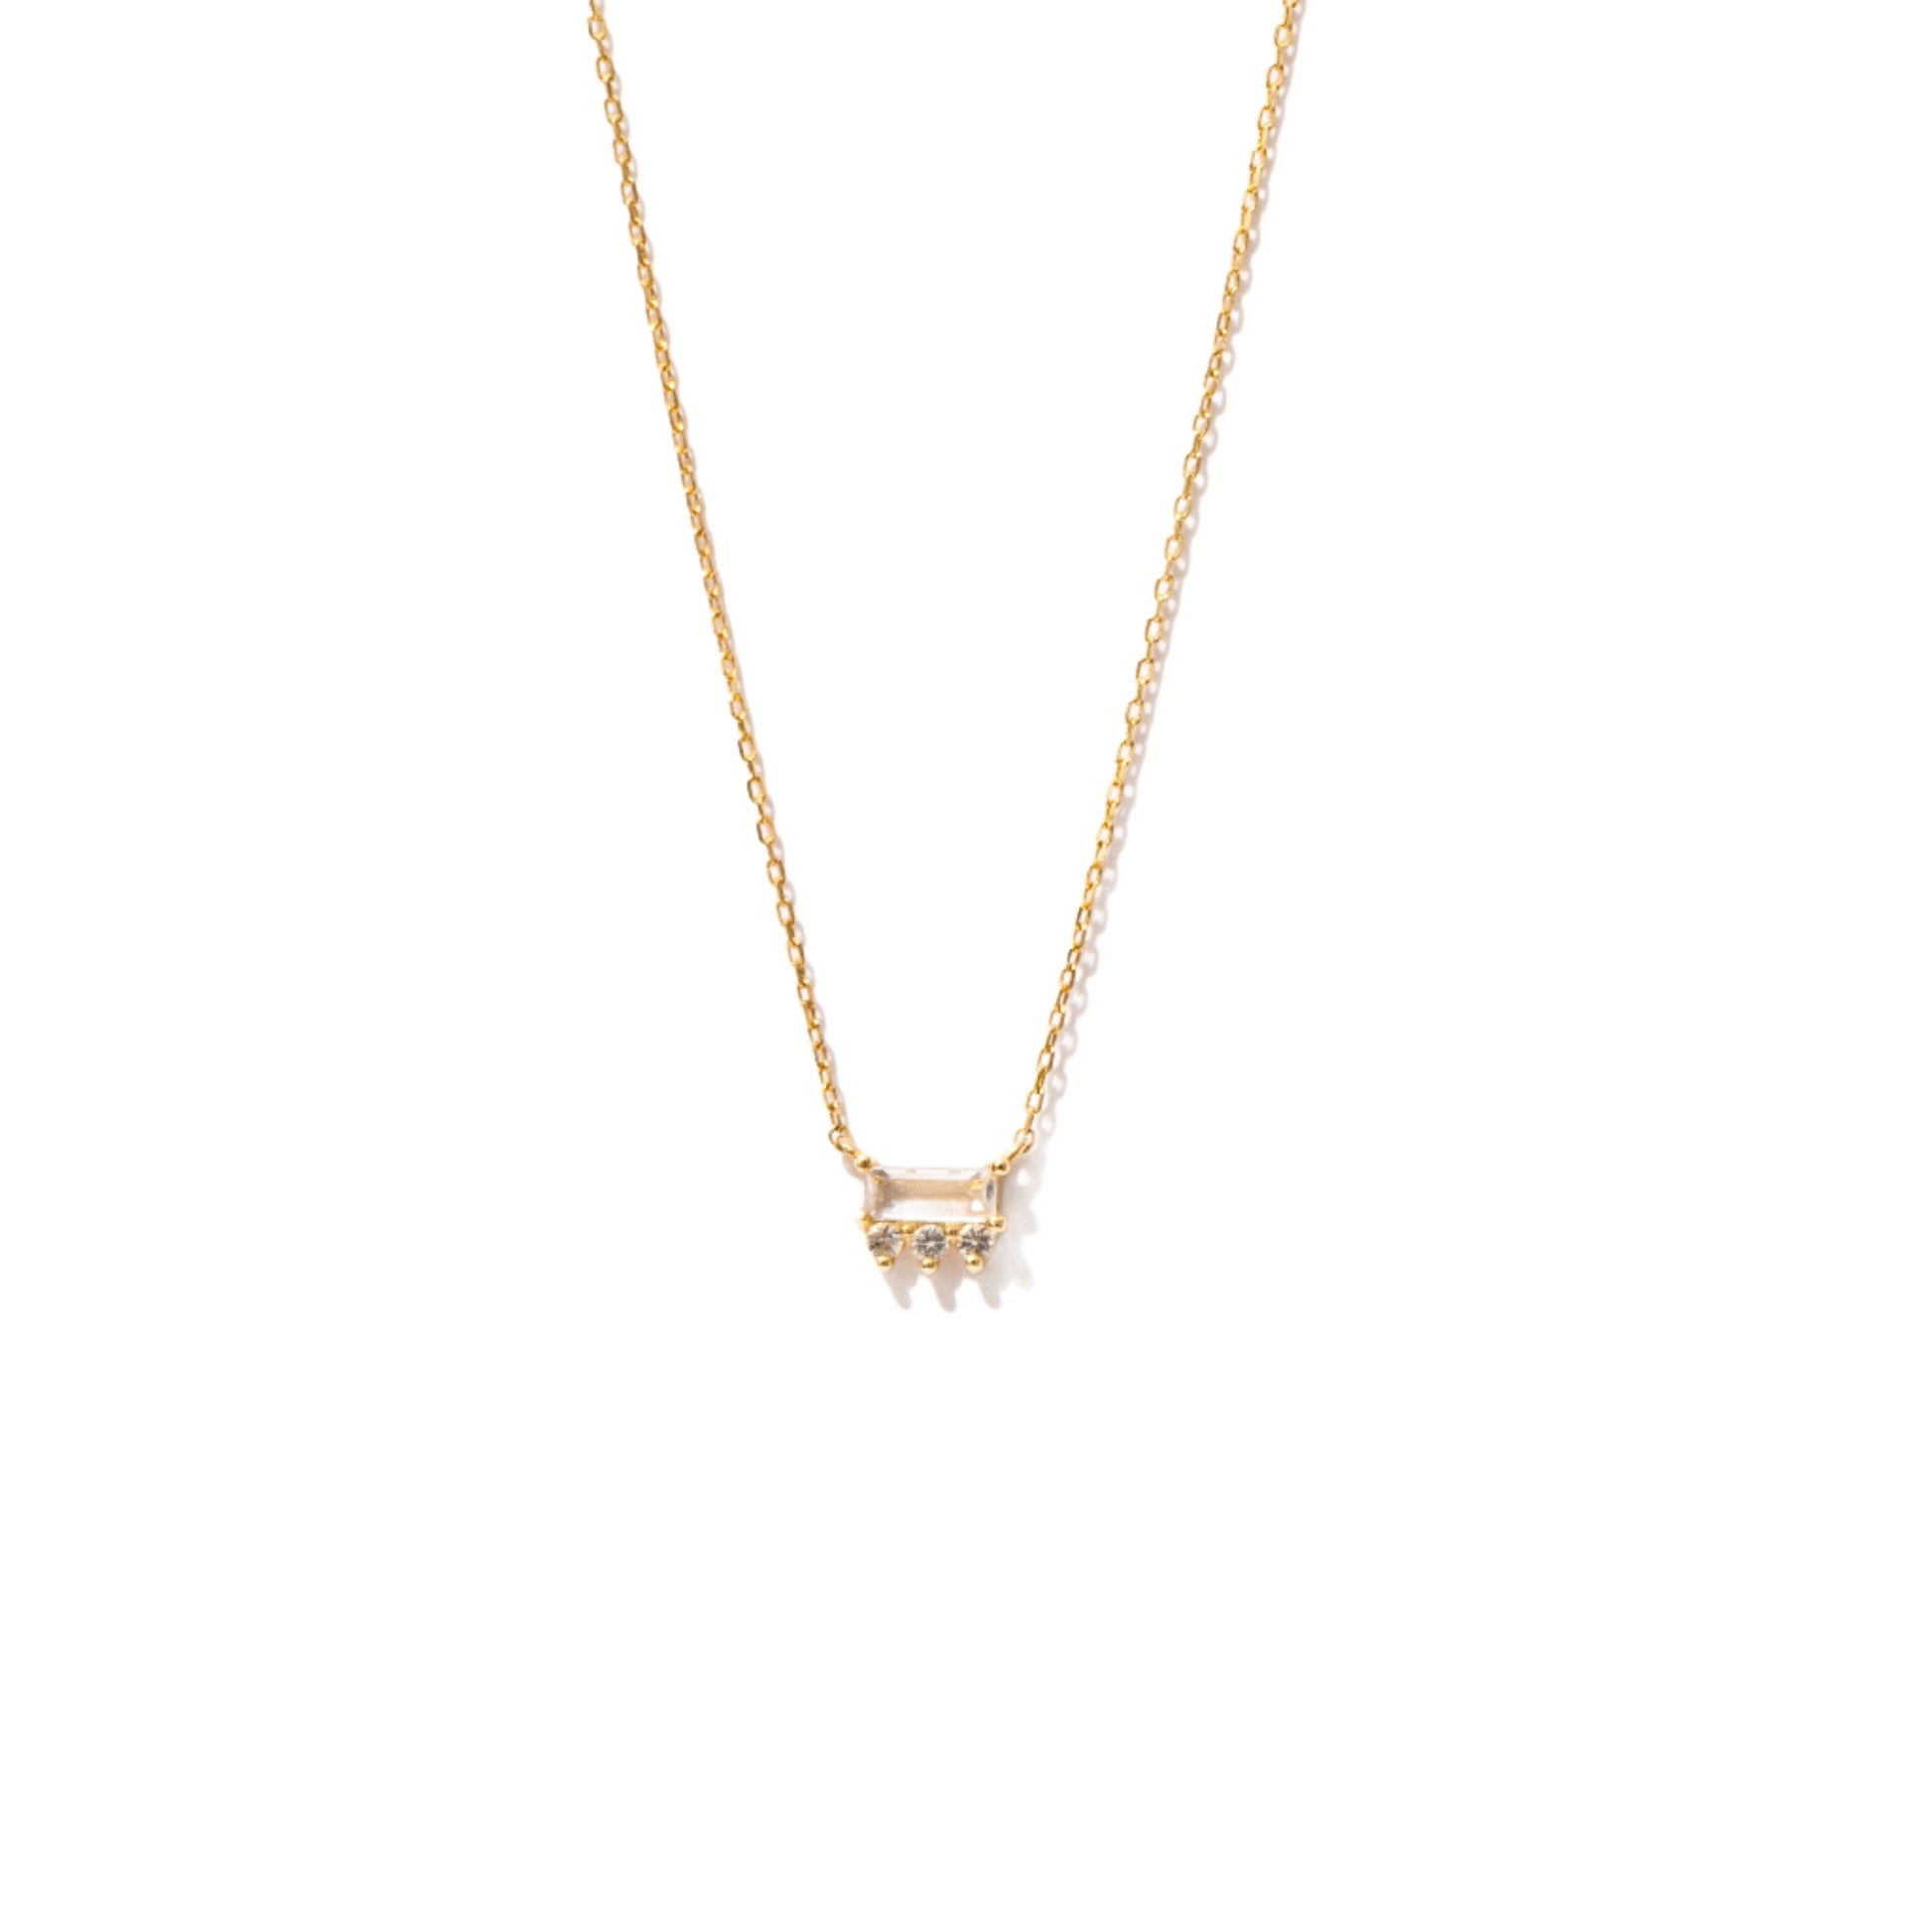 White Sapphire Necklace 14K Gold